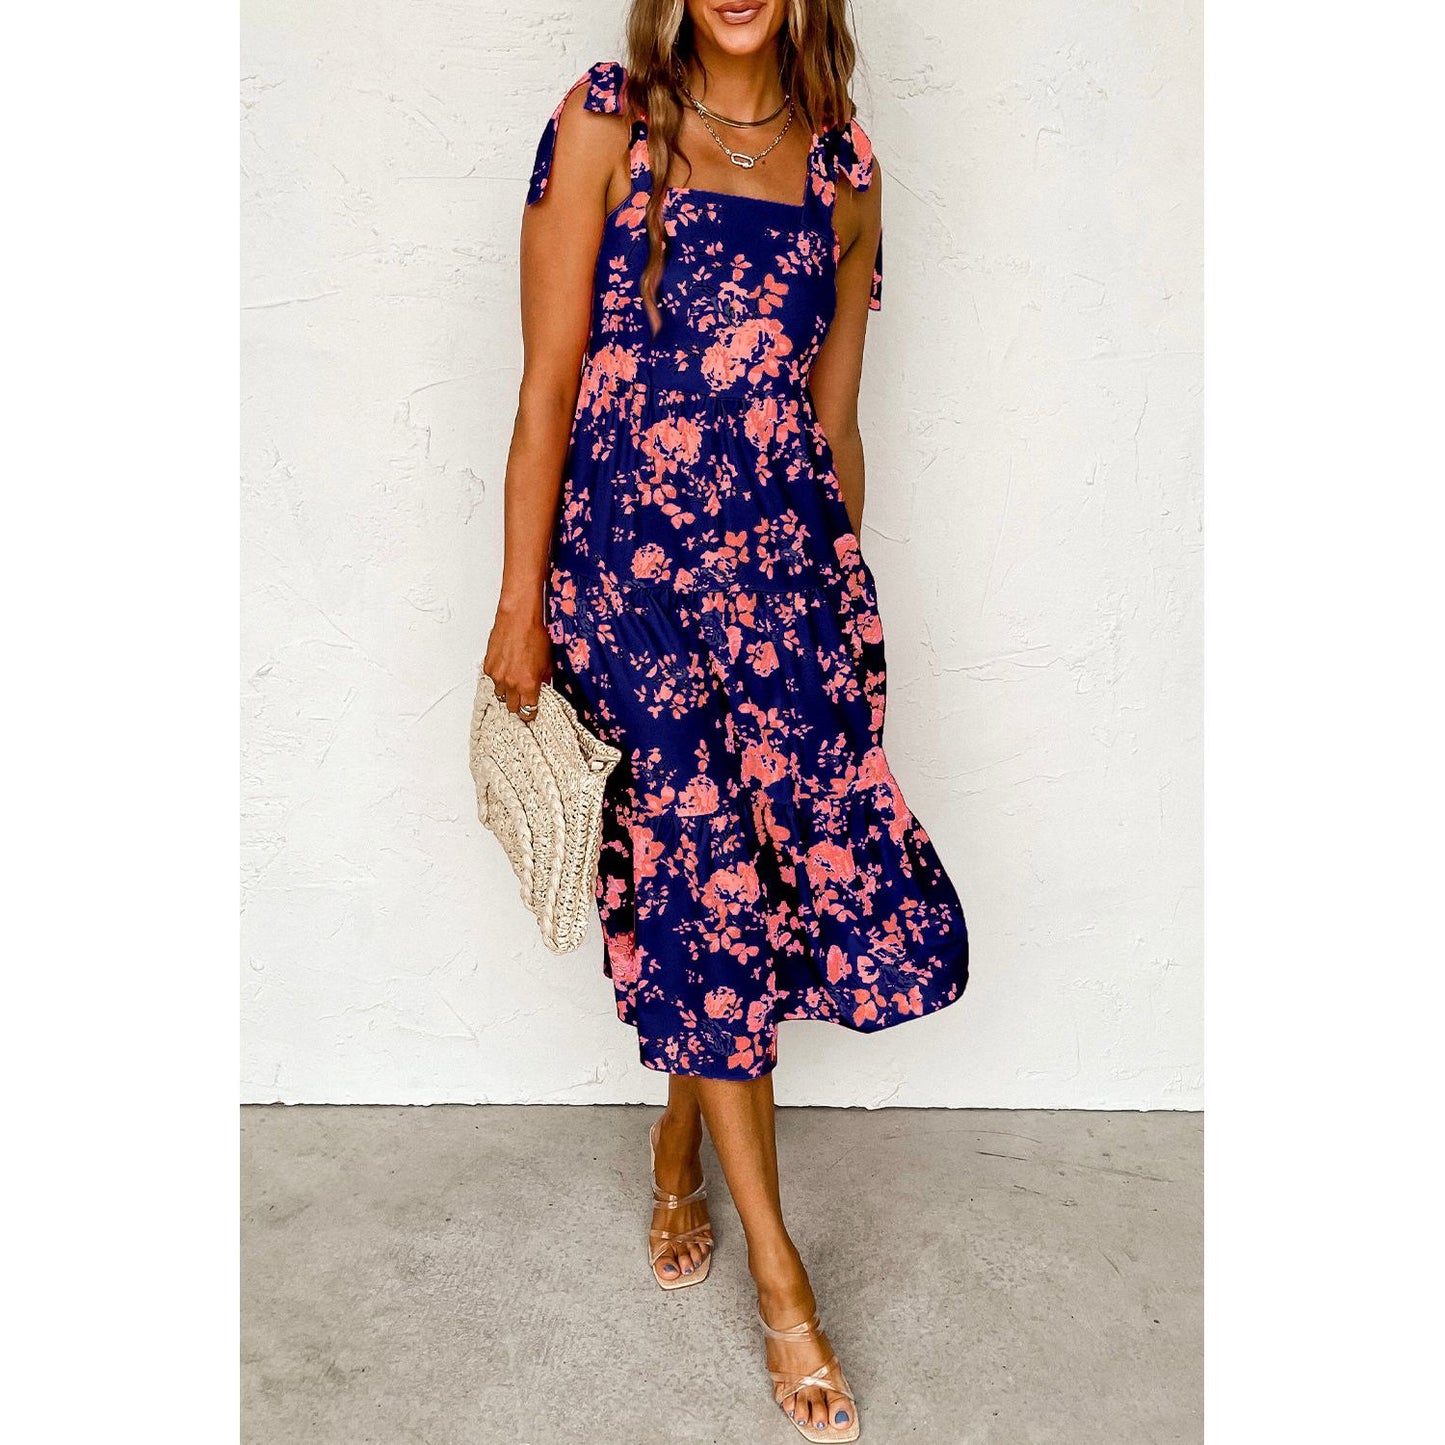 Nothing To Lose Blue Tie Shoulder Straps Tiered Floral Dress